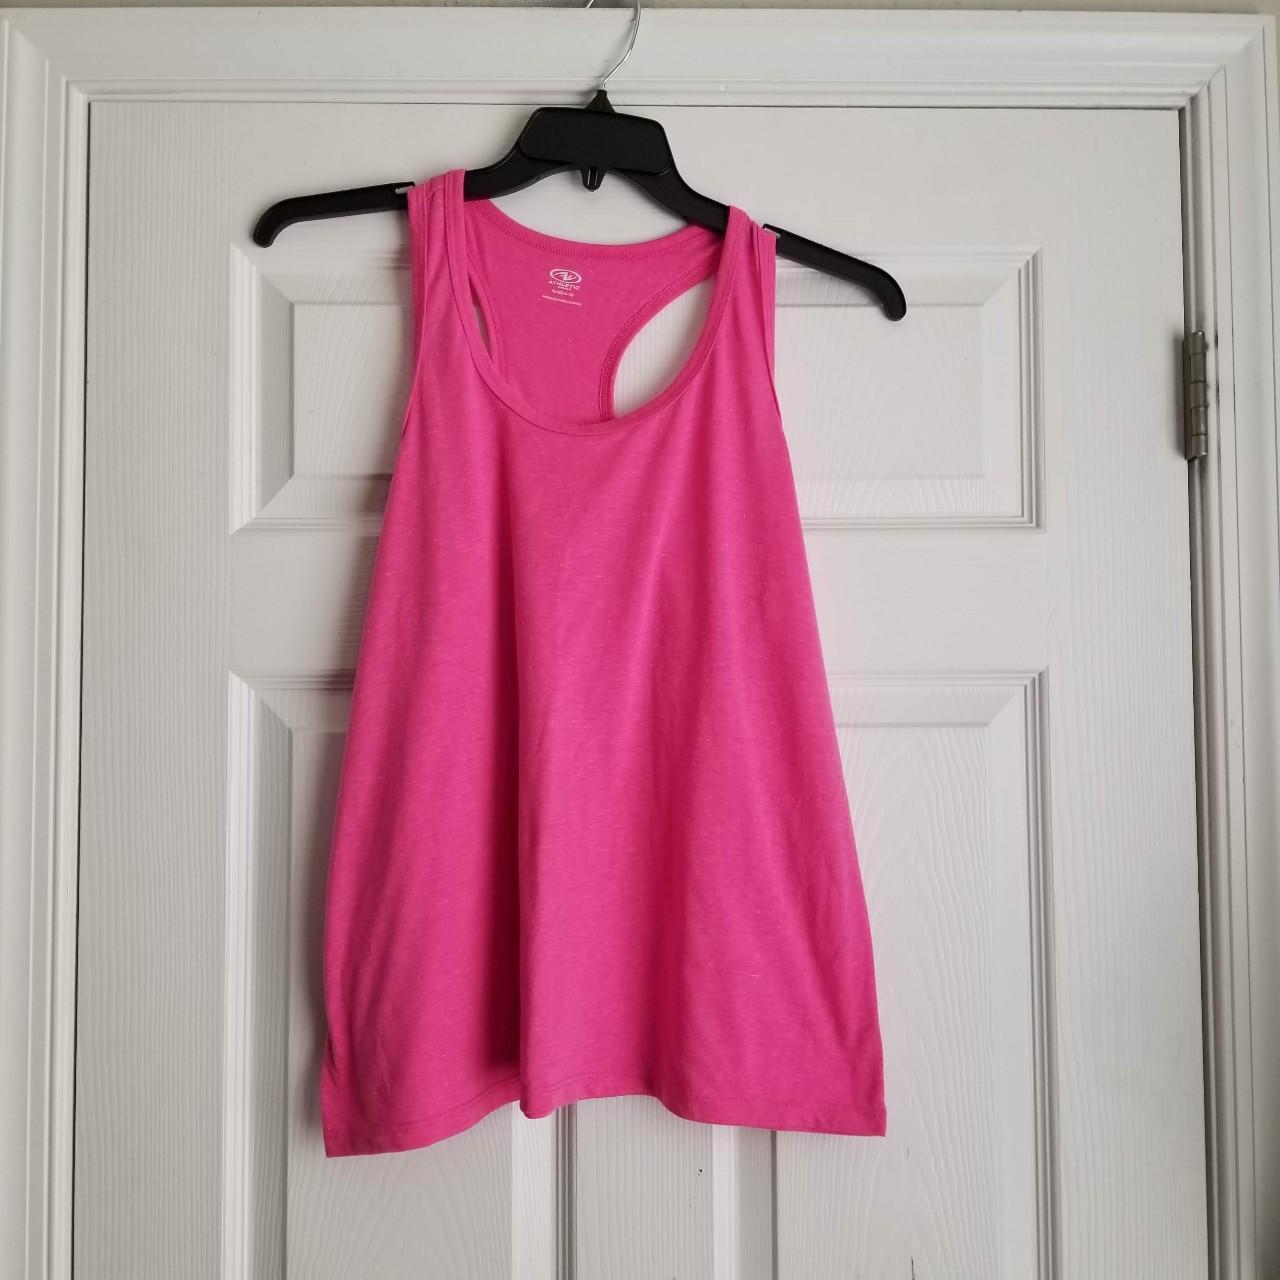 Athletic Works, Tops, Athletic Works Womens Workout Top Xl Pink